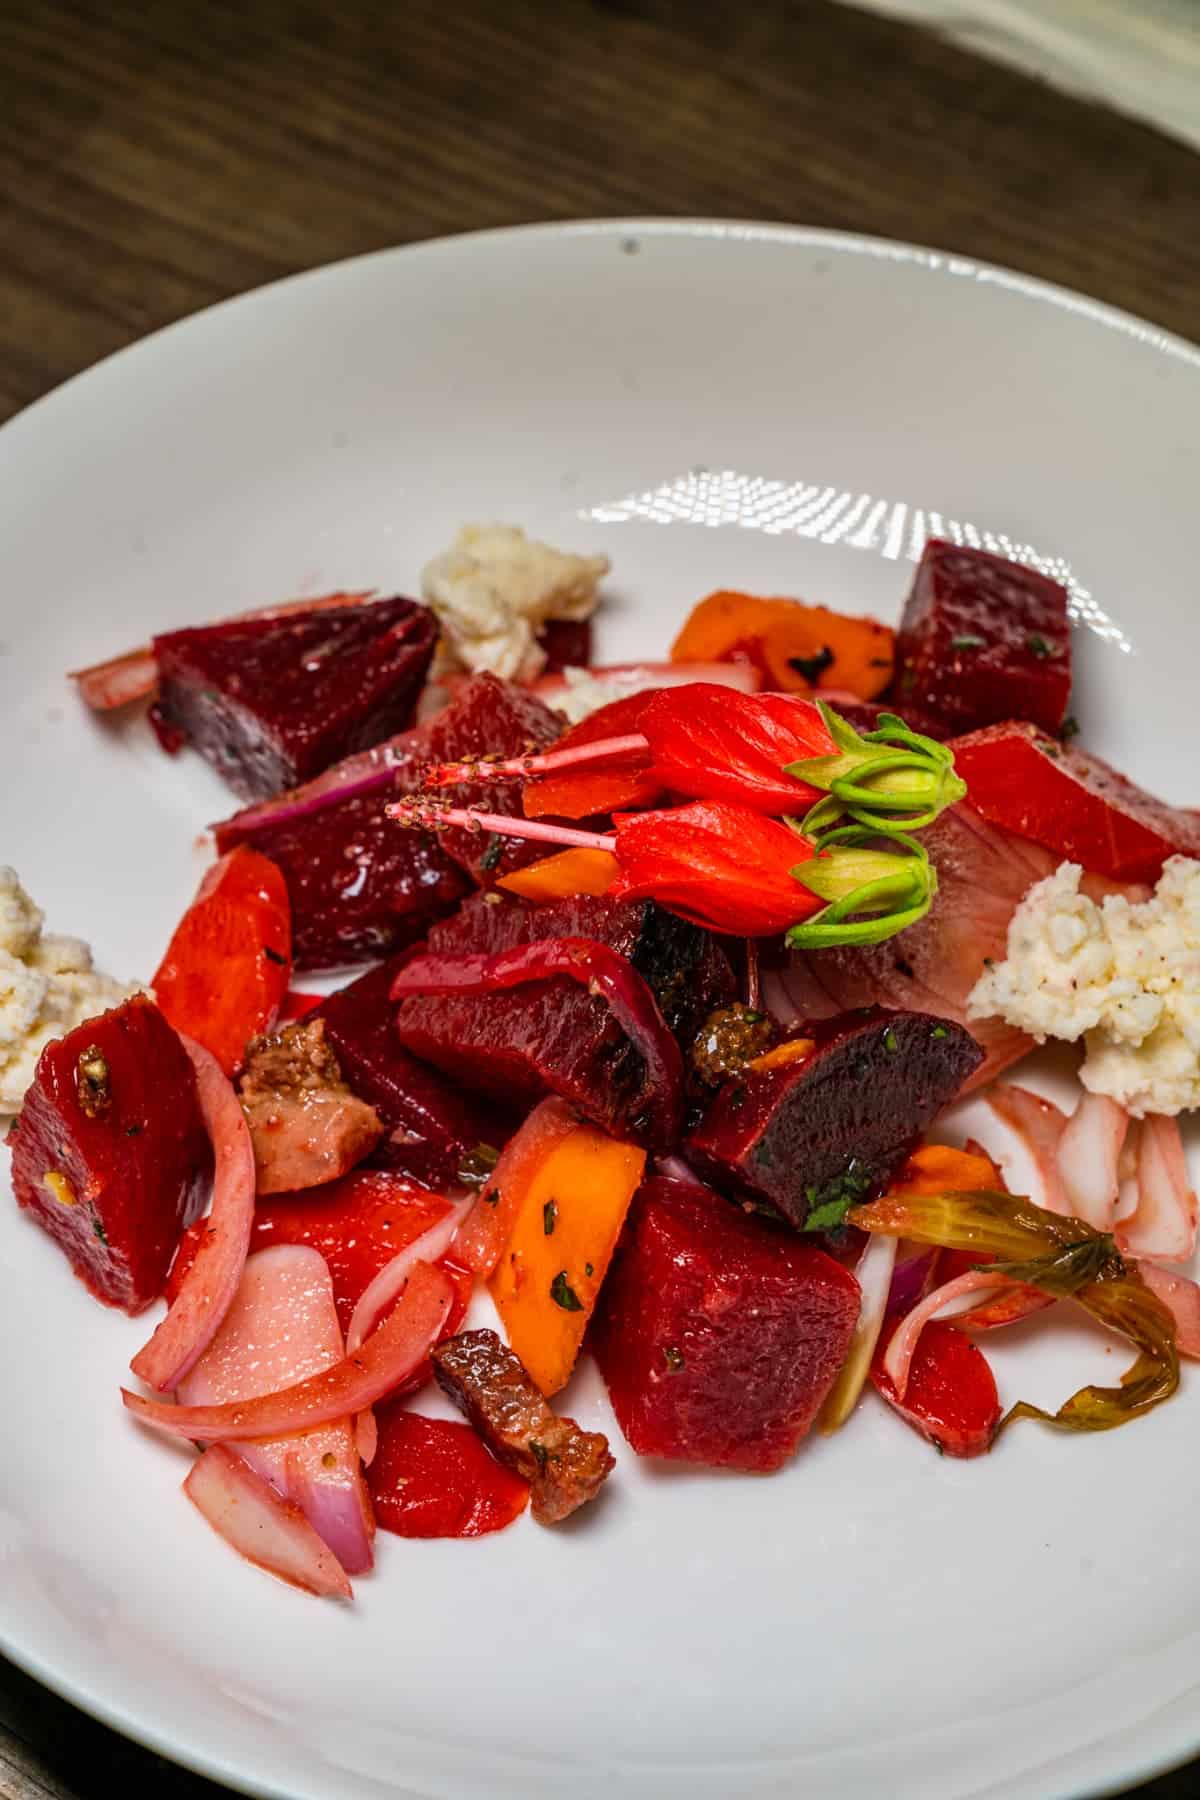 Plate of beets, carrots, and goat cheese with an edible flower on top